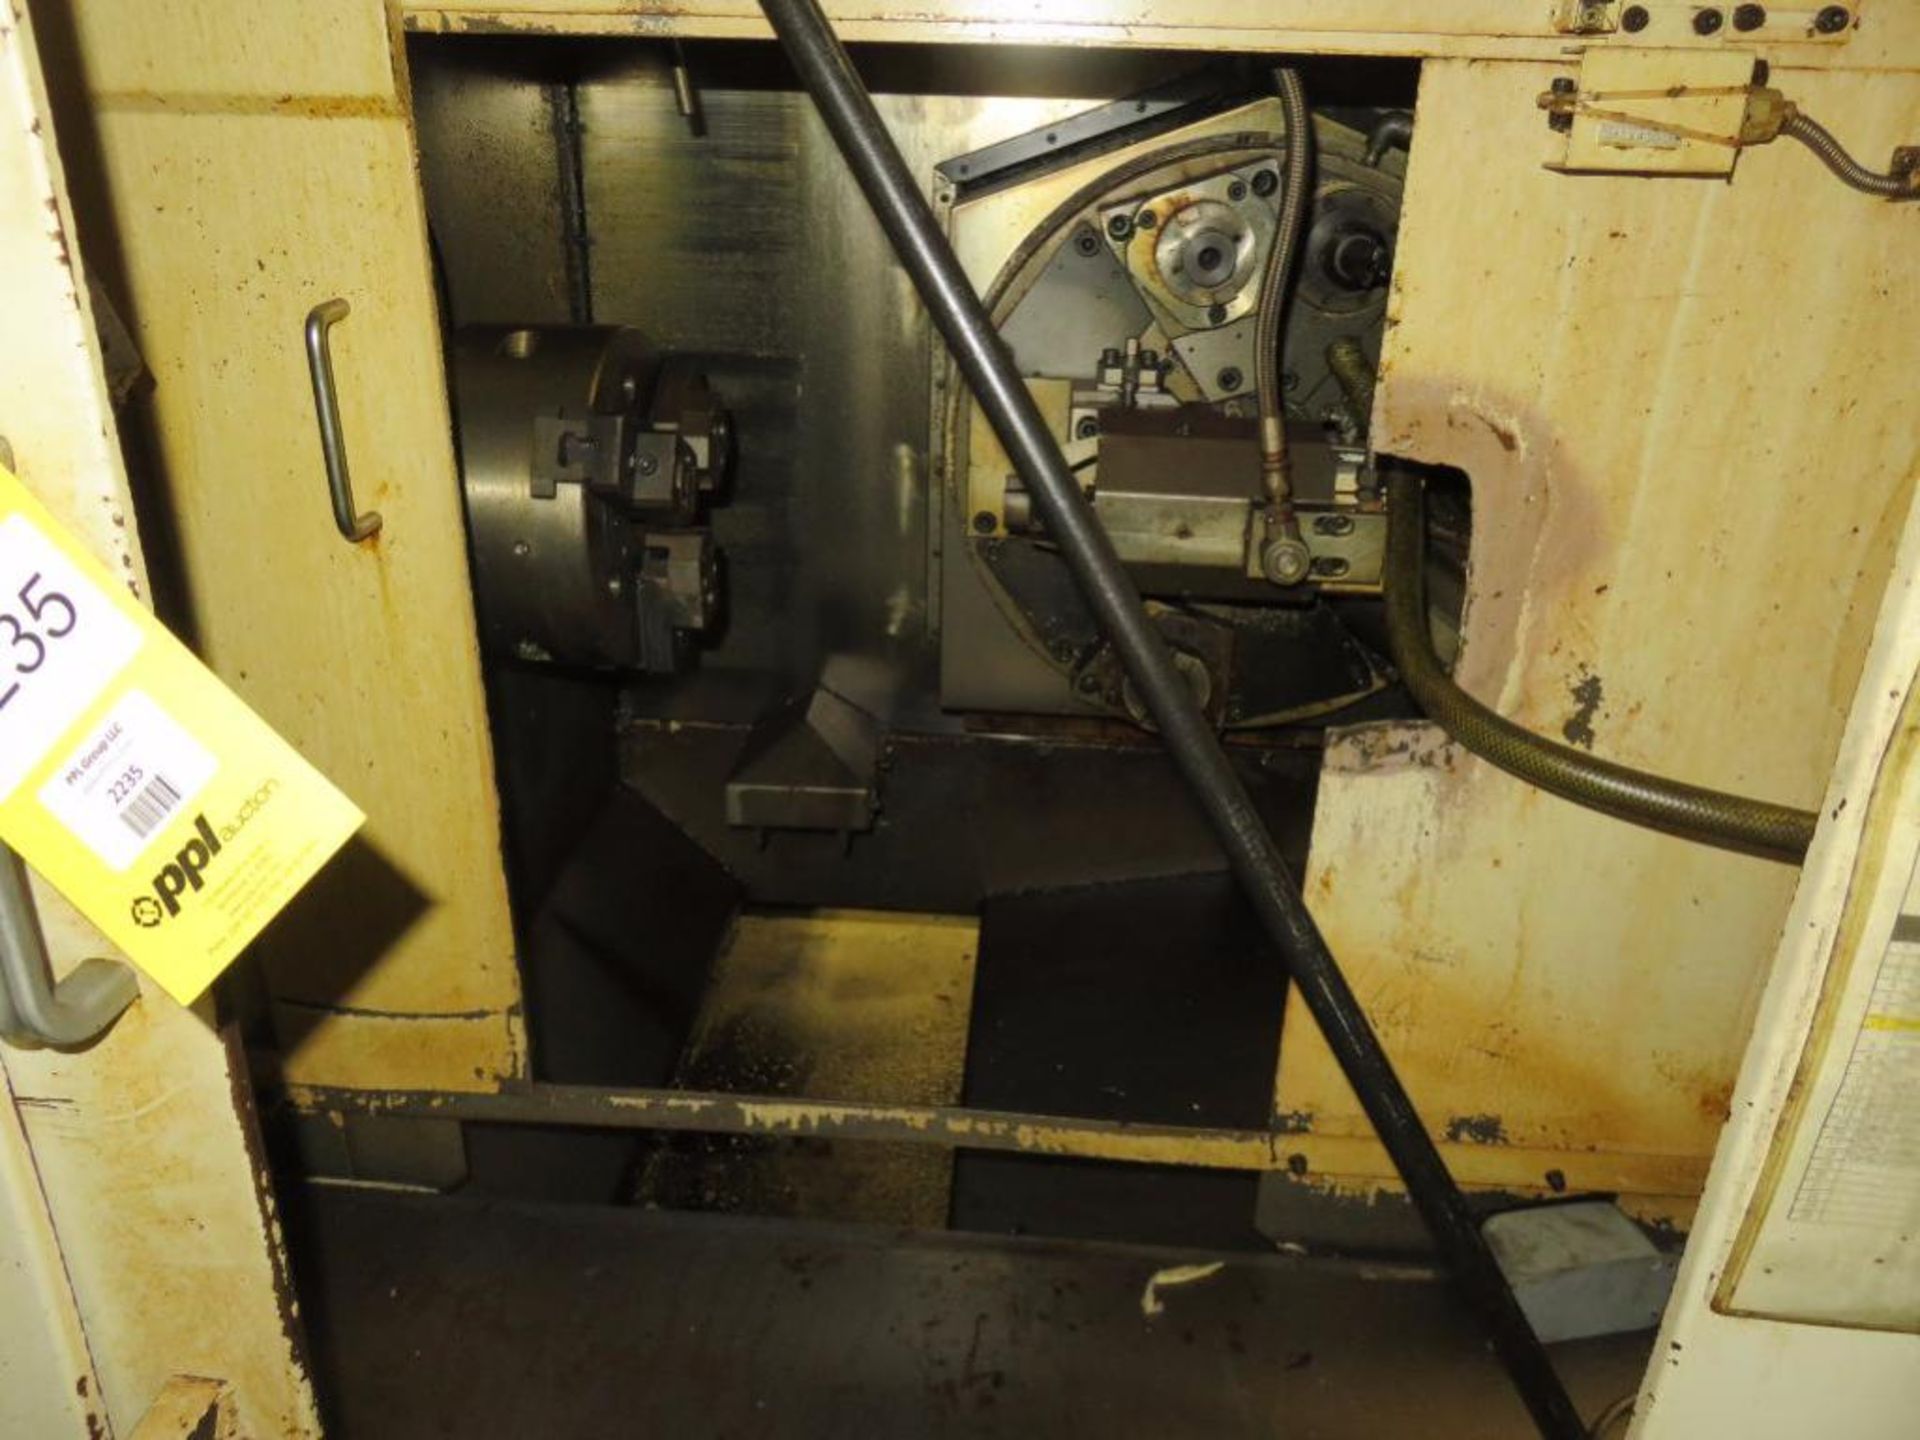 Fuji 4-Axis CNC Turning Center Model HM3-AL, S/N 12098 (1998) (Location K) - Image 3 of 3